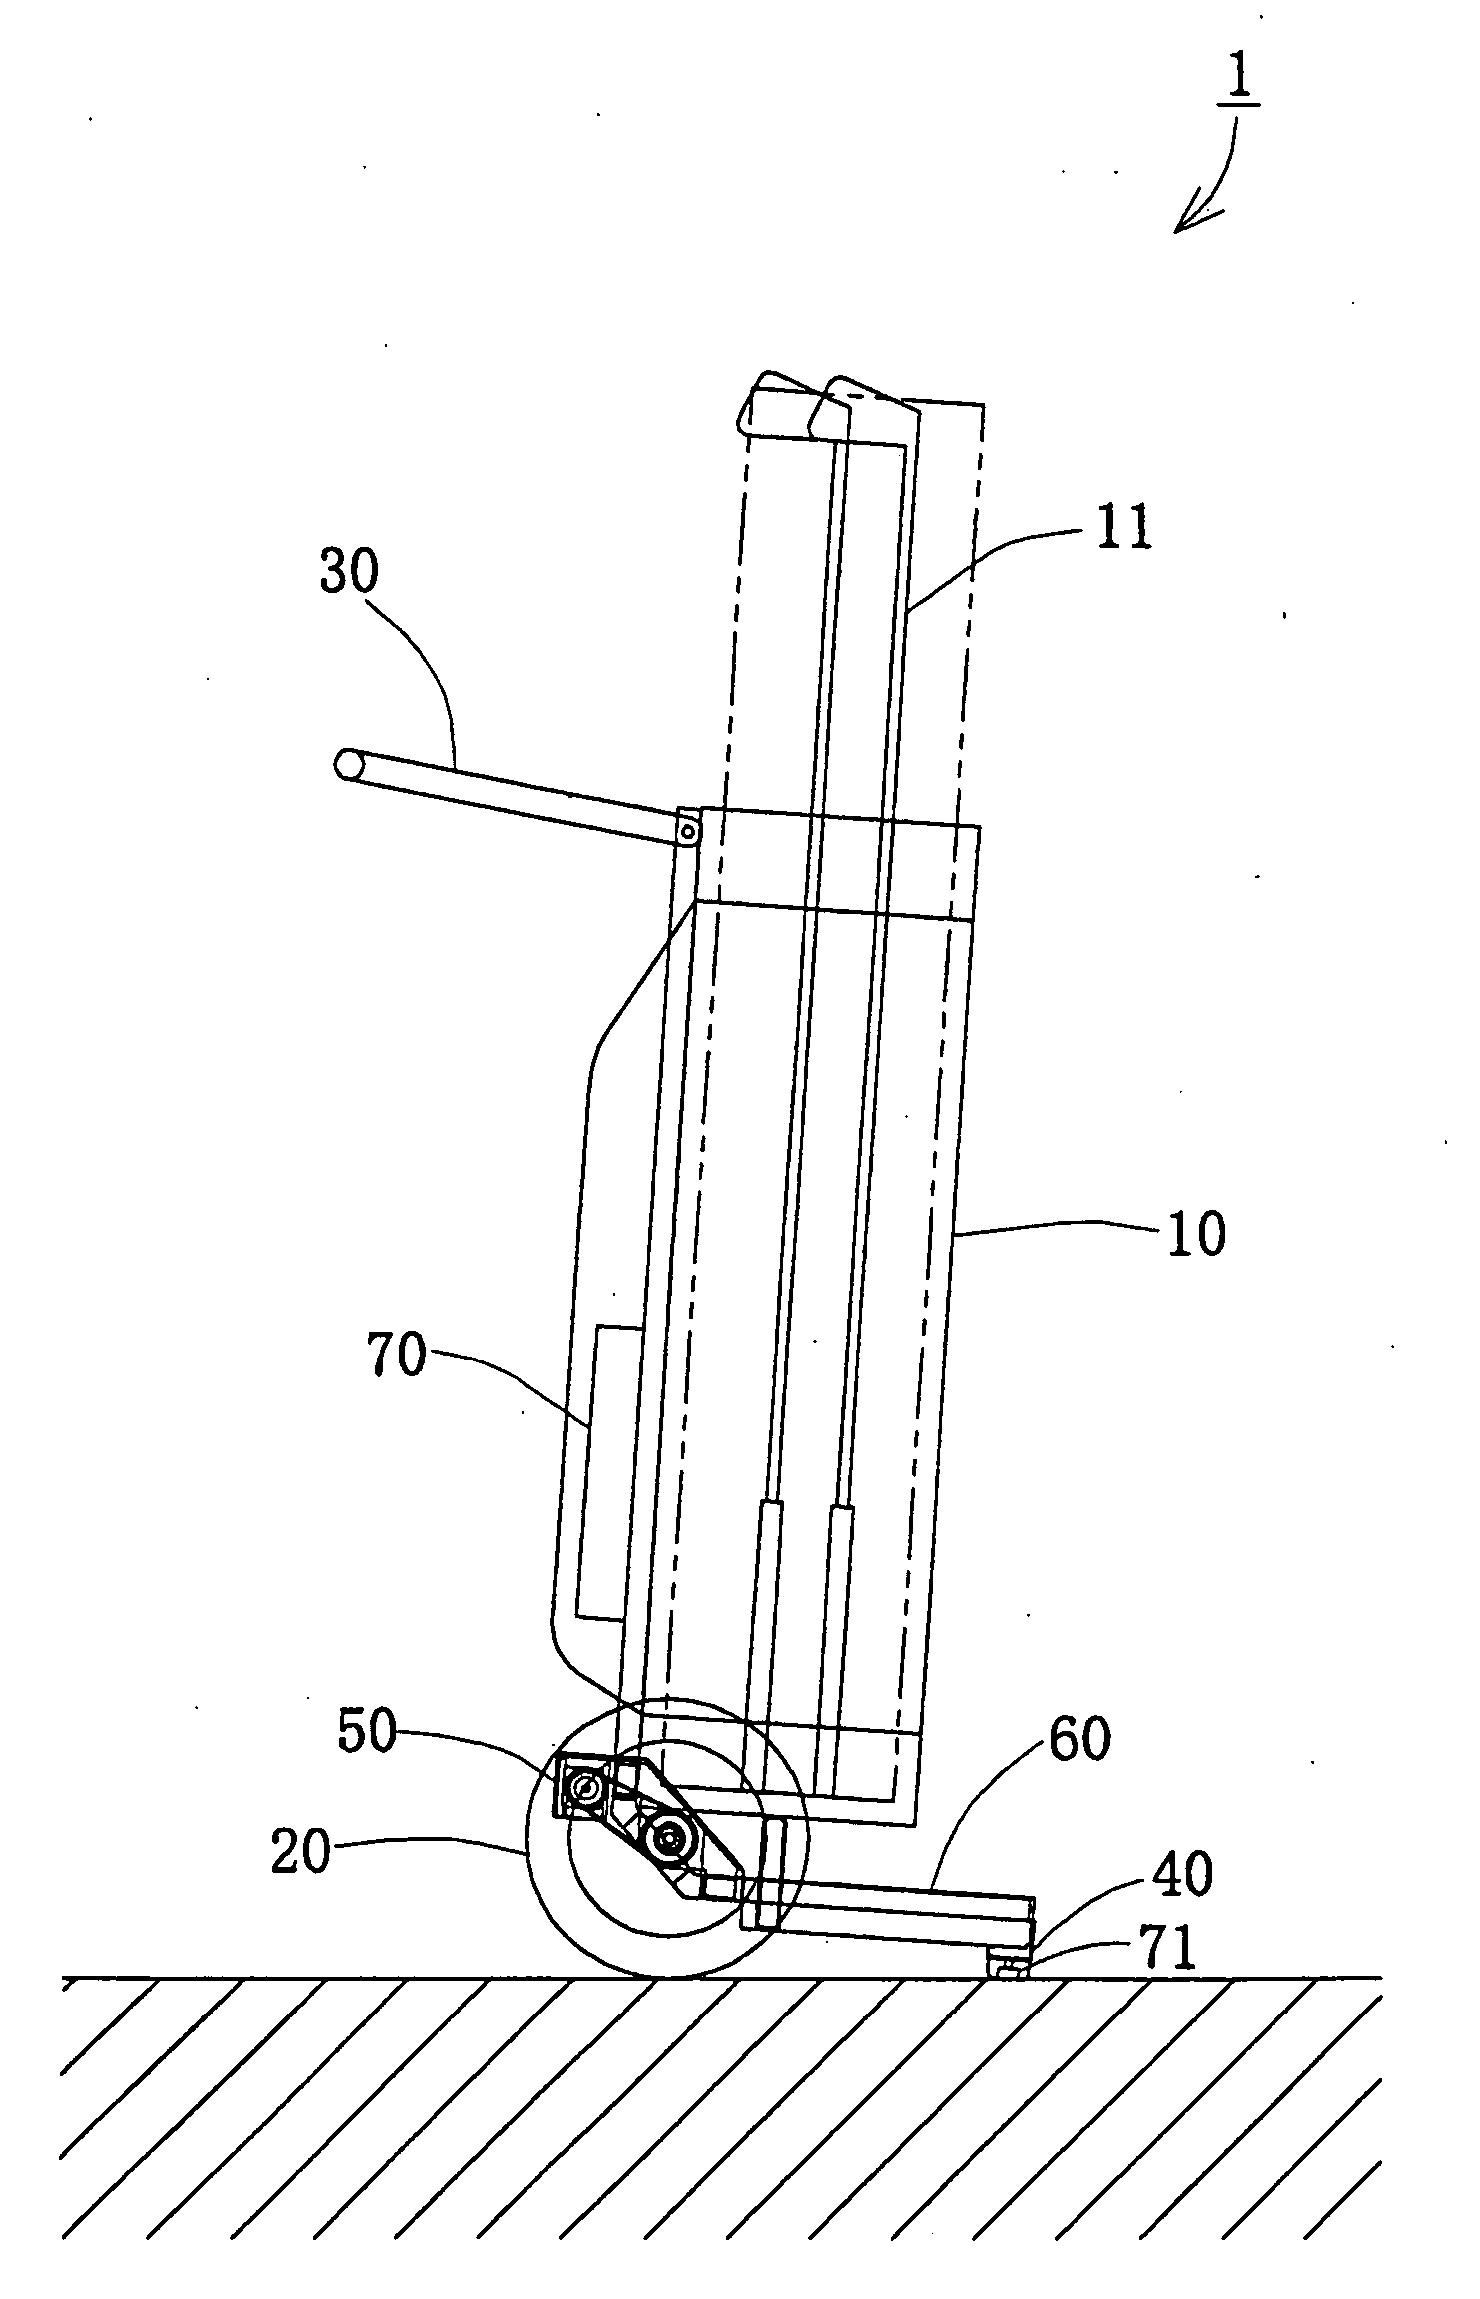 Powered manual propelling vehicle